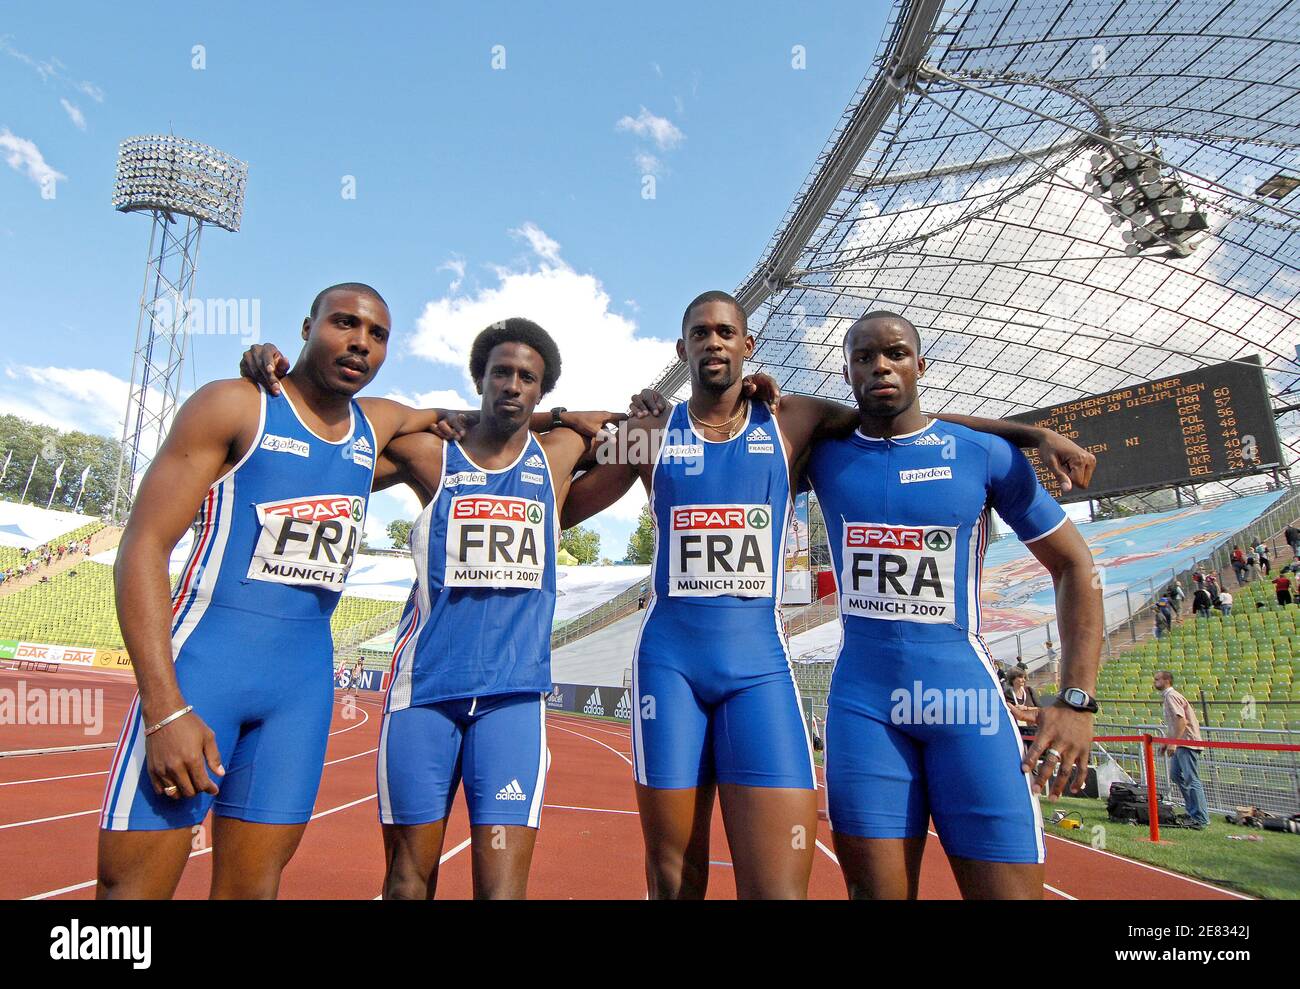 French Athlets (From L to R) Eddy Delepine, Issa Aime N'Thepee, David Alerte and Martial Mbandjock pose at the end of the men's 4x100 meters relay during the Spar European Cup in athletics, in Munich, Germany, on June 23, 2007. Photo by Christophe Guibbaud/Cameleon/ABACAPRESS.COM Stock Photo